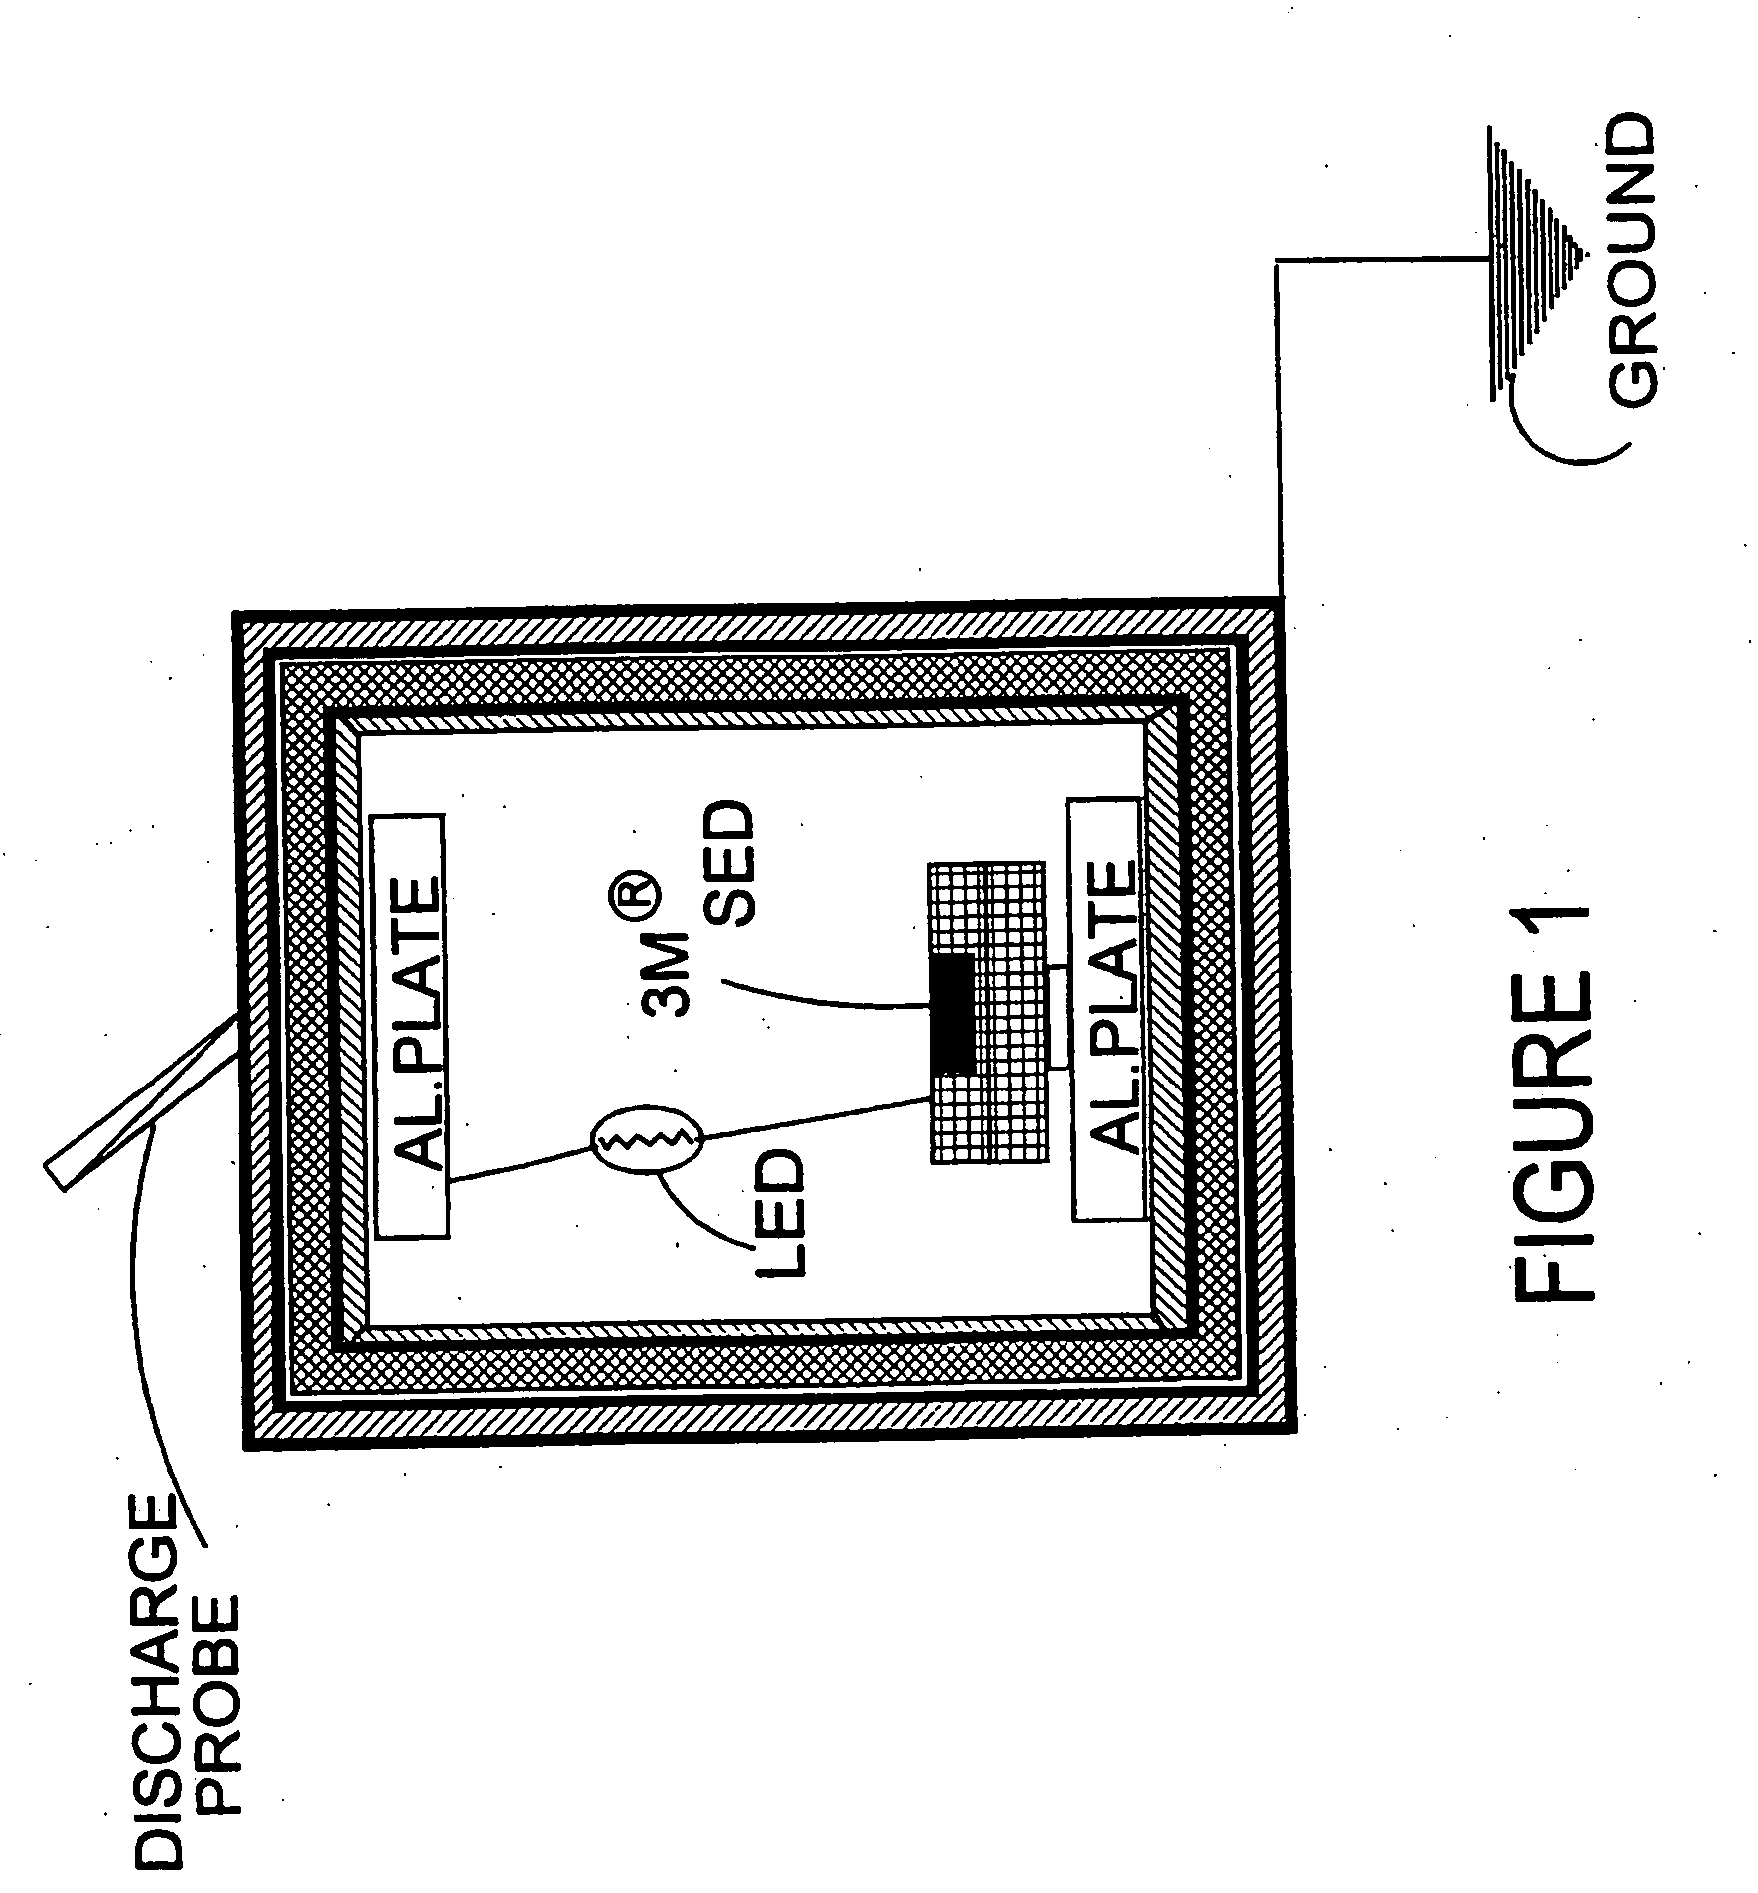 Packaging material for electrostatic sensitive devices